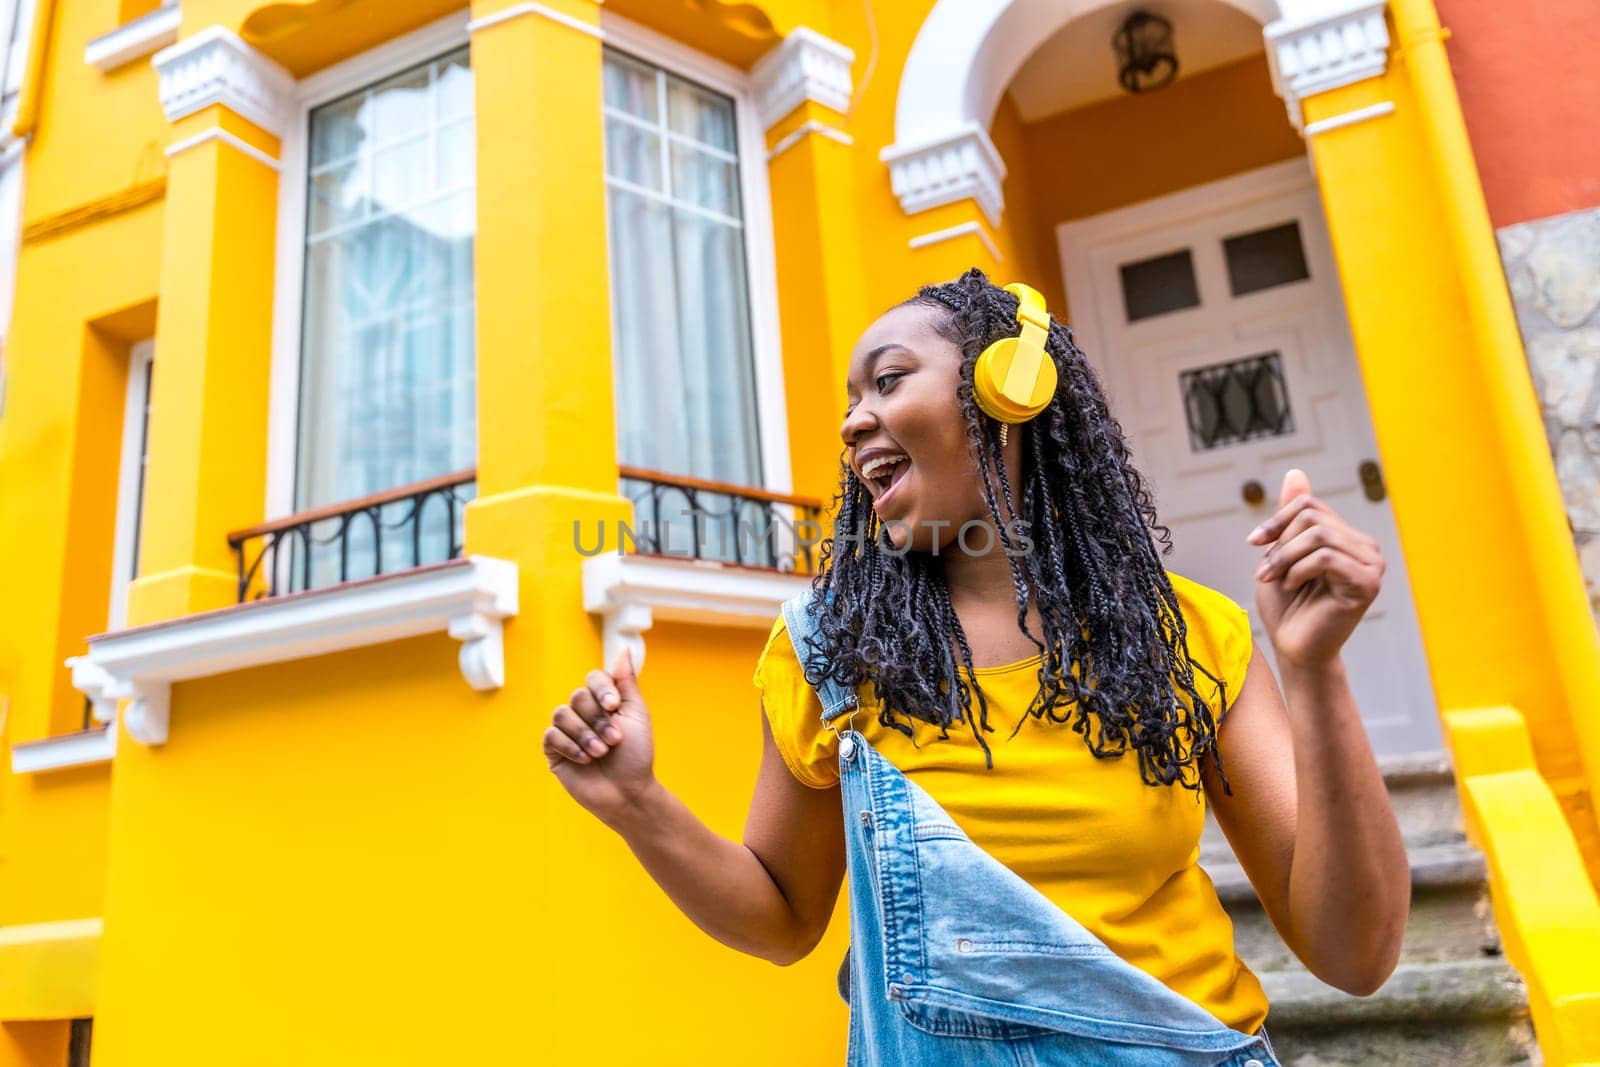 Low angle view photo of a cool african young woman dancing listening to music in the street outside a yellow house